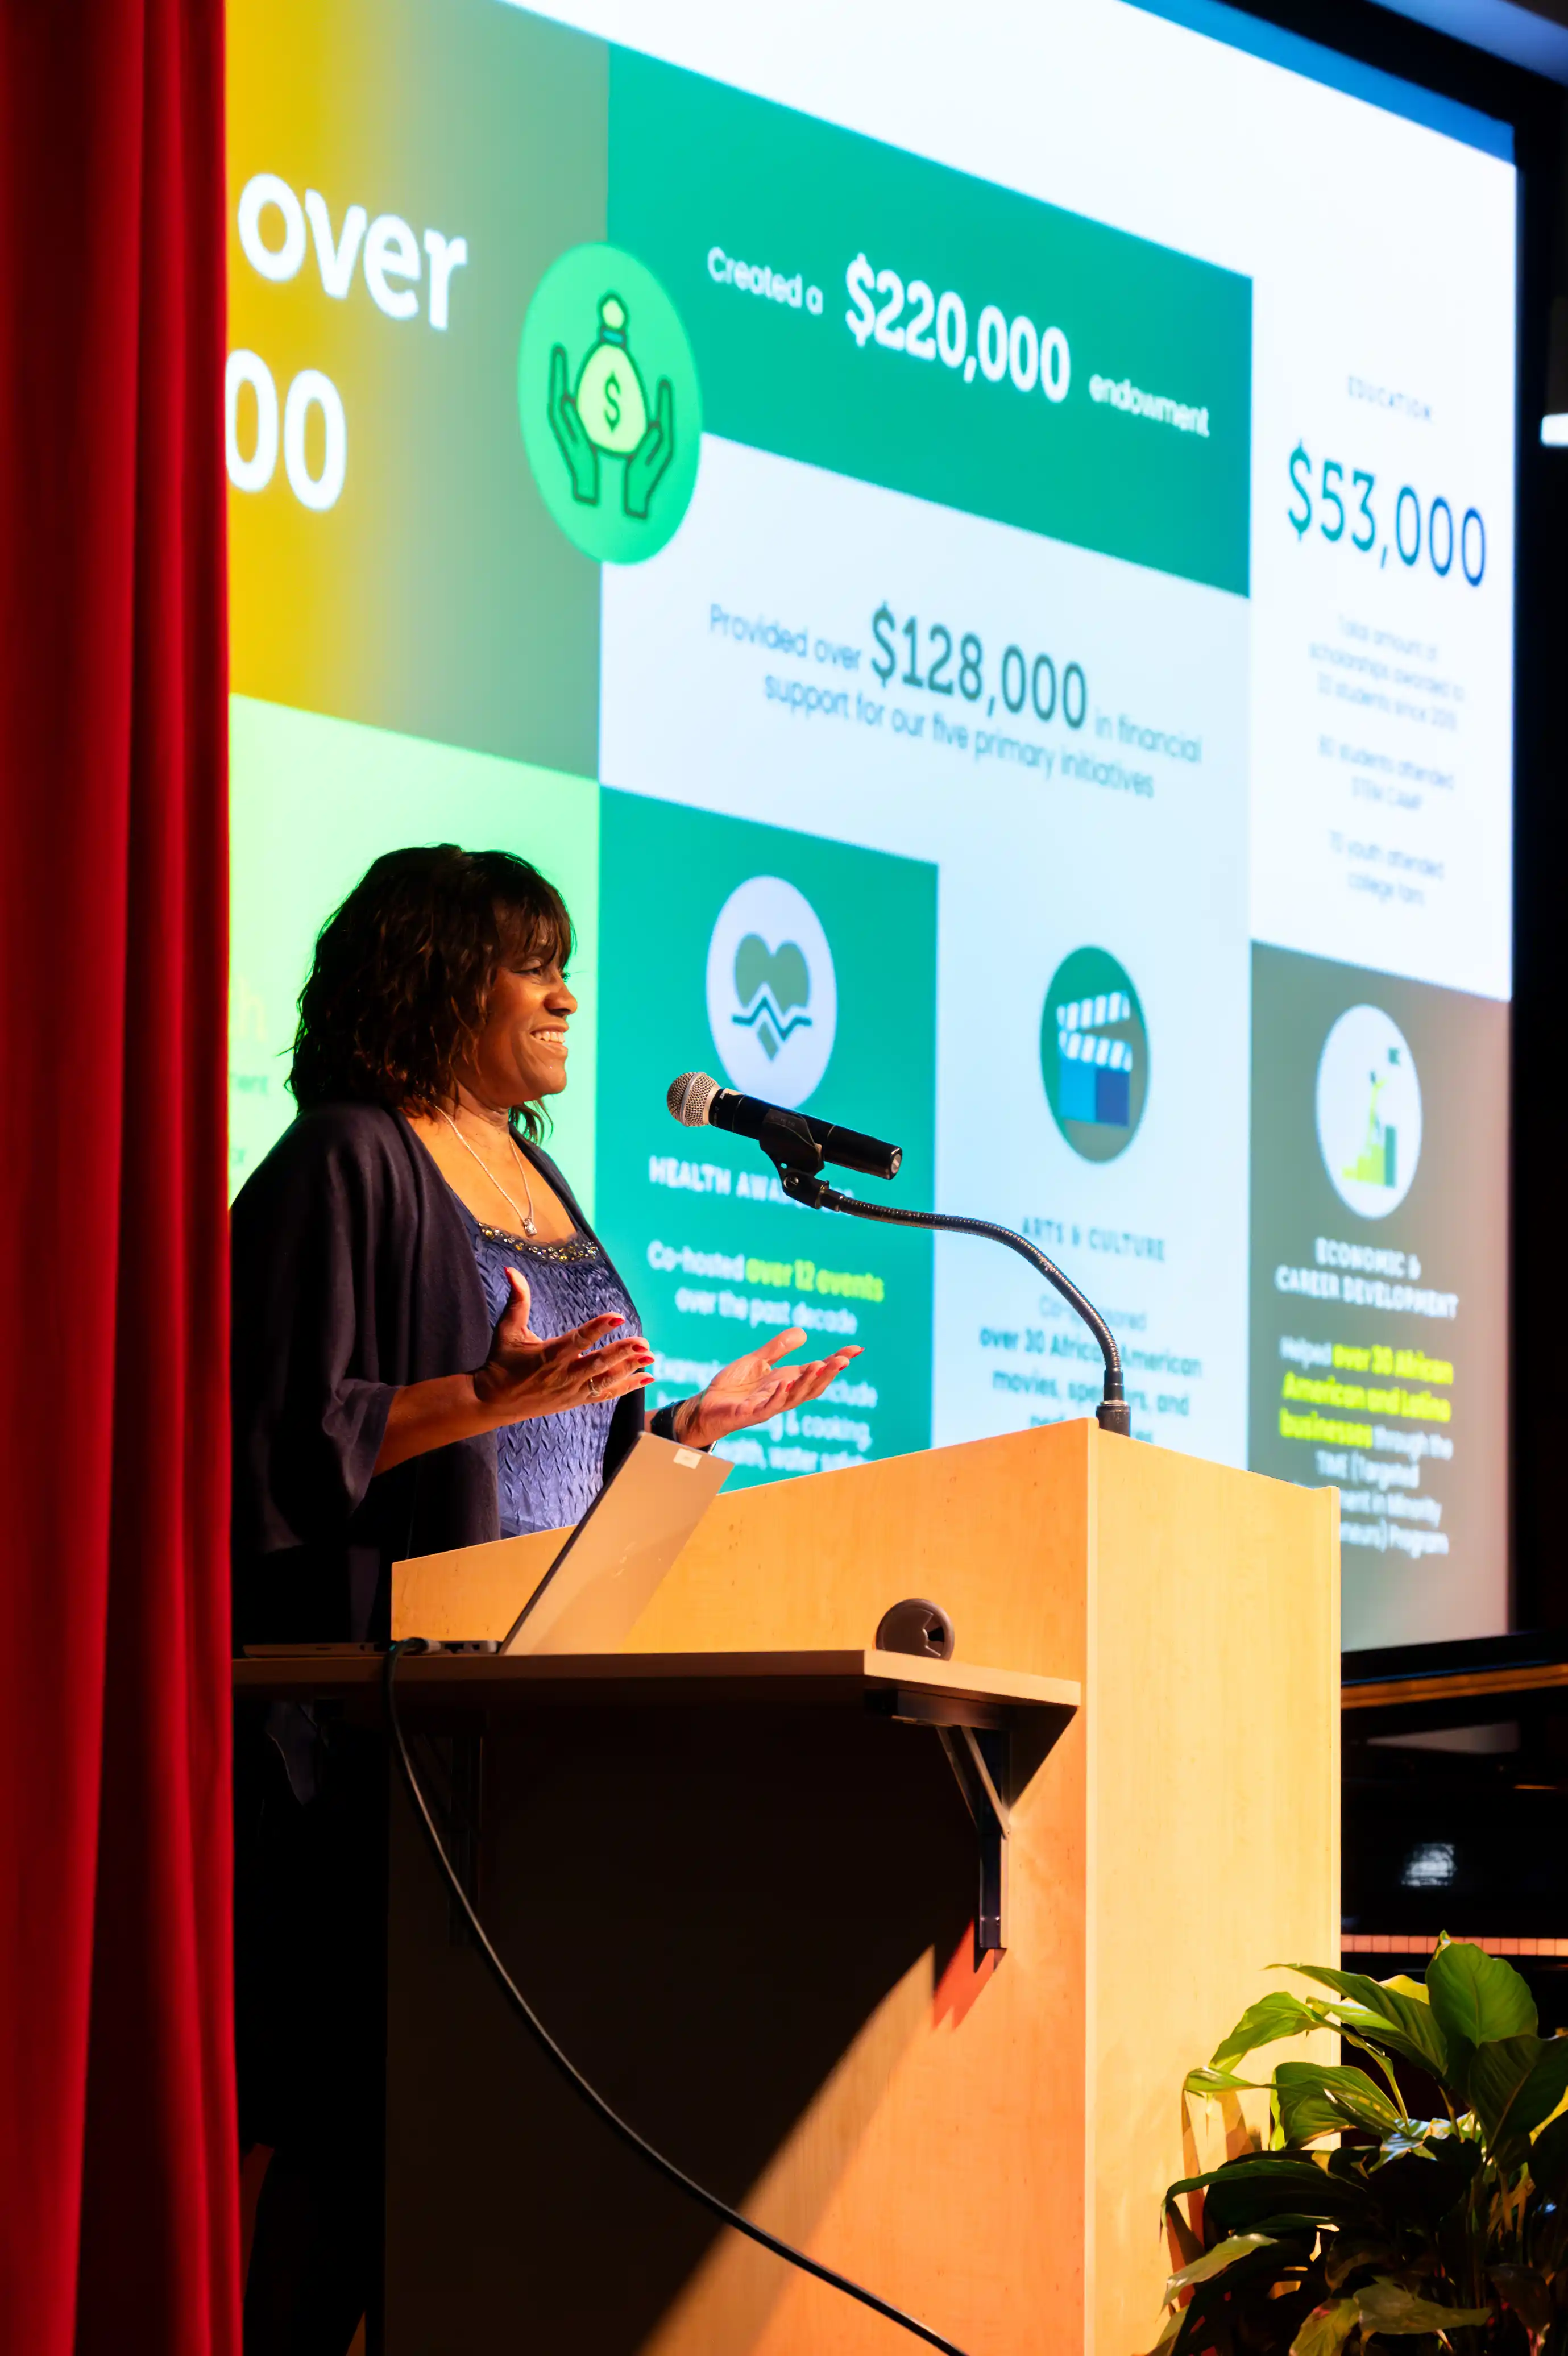 Woman presenting at a conference with a projector screen displaying financial figures behind her.